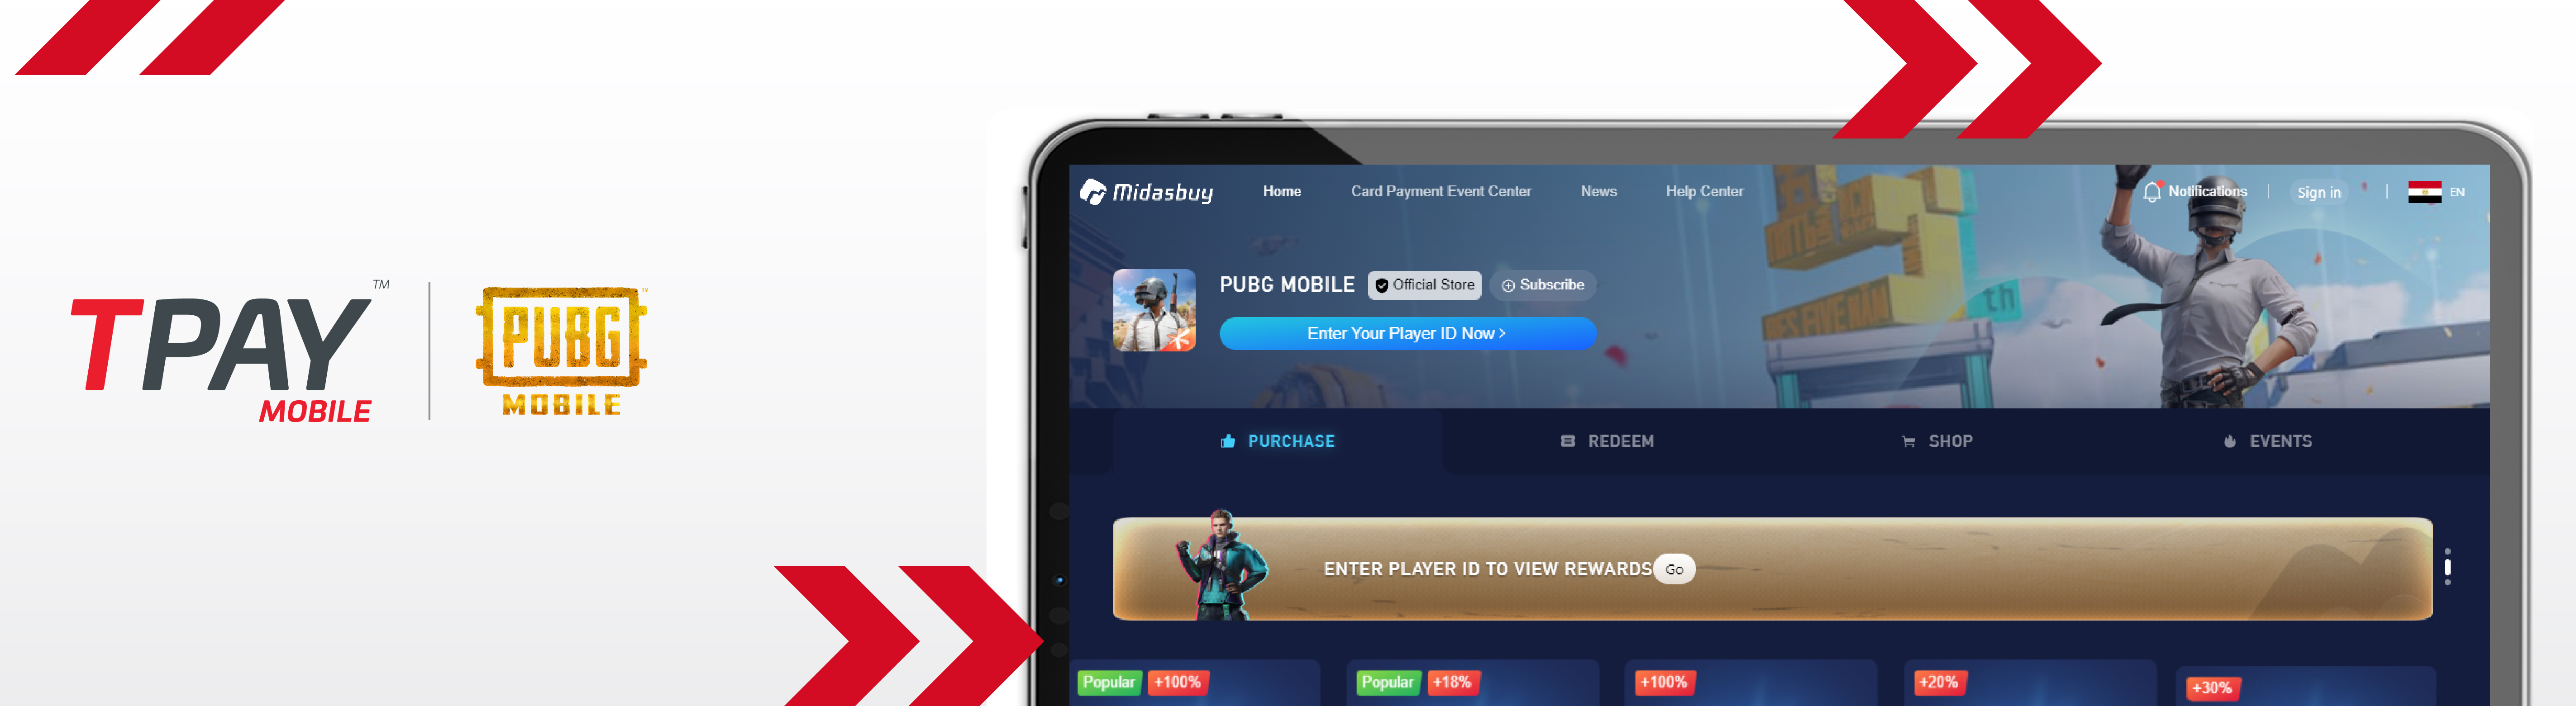 TPAY to enable Mobile Payments for PUBG MOBILE in Egypt!